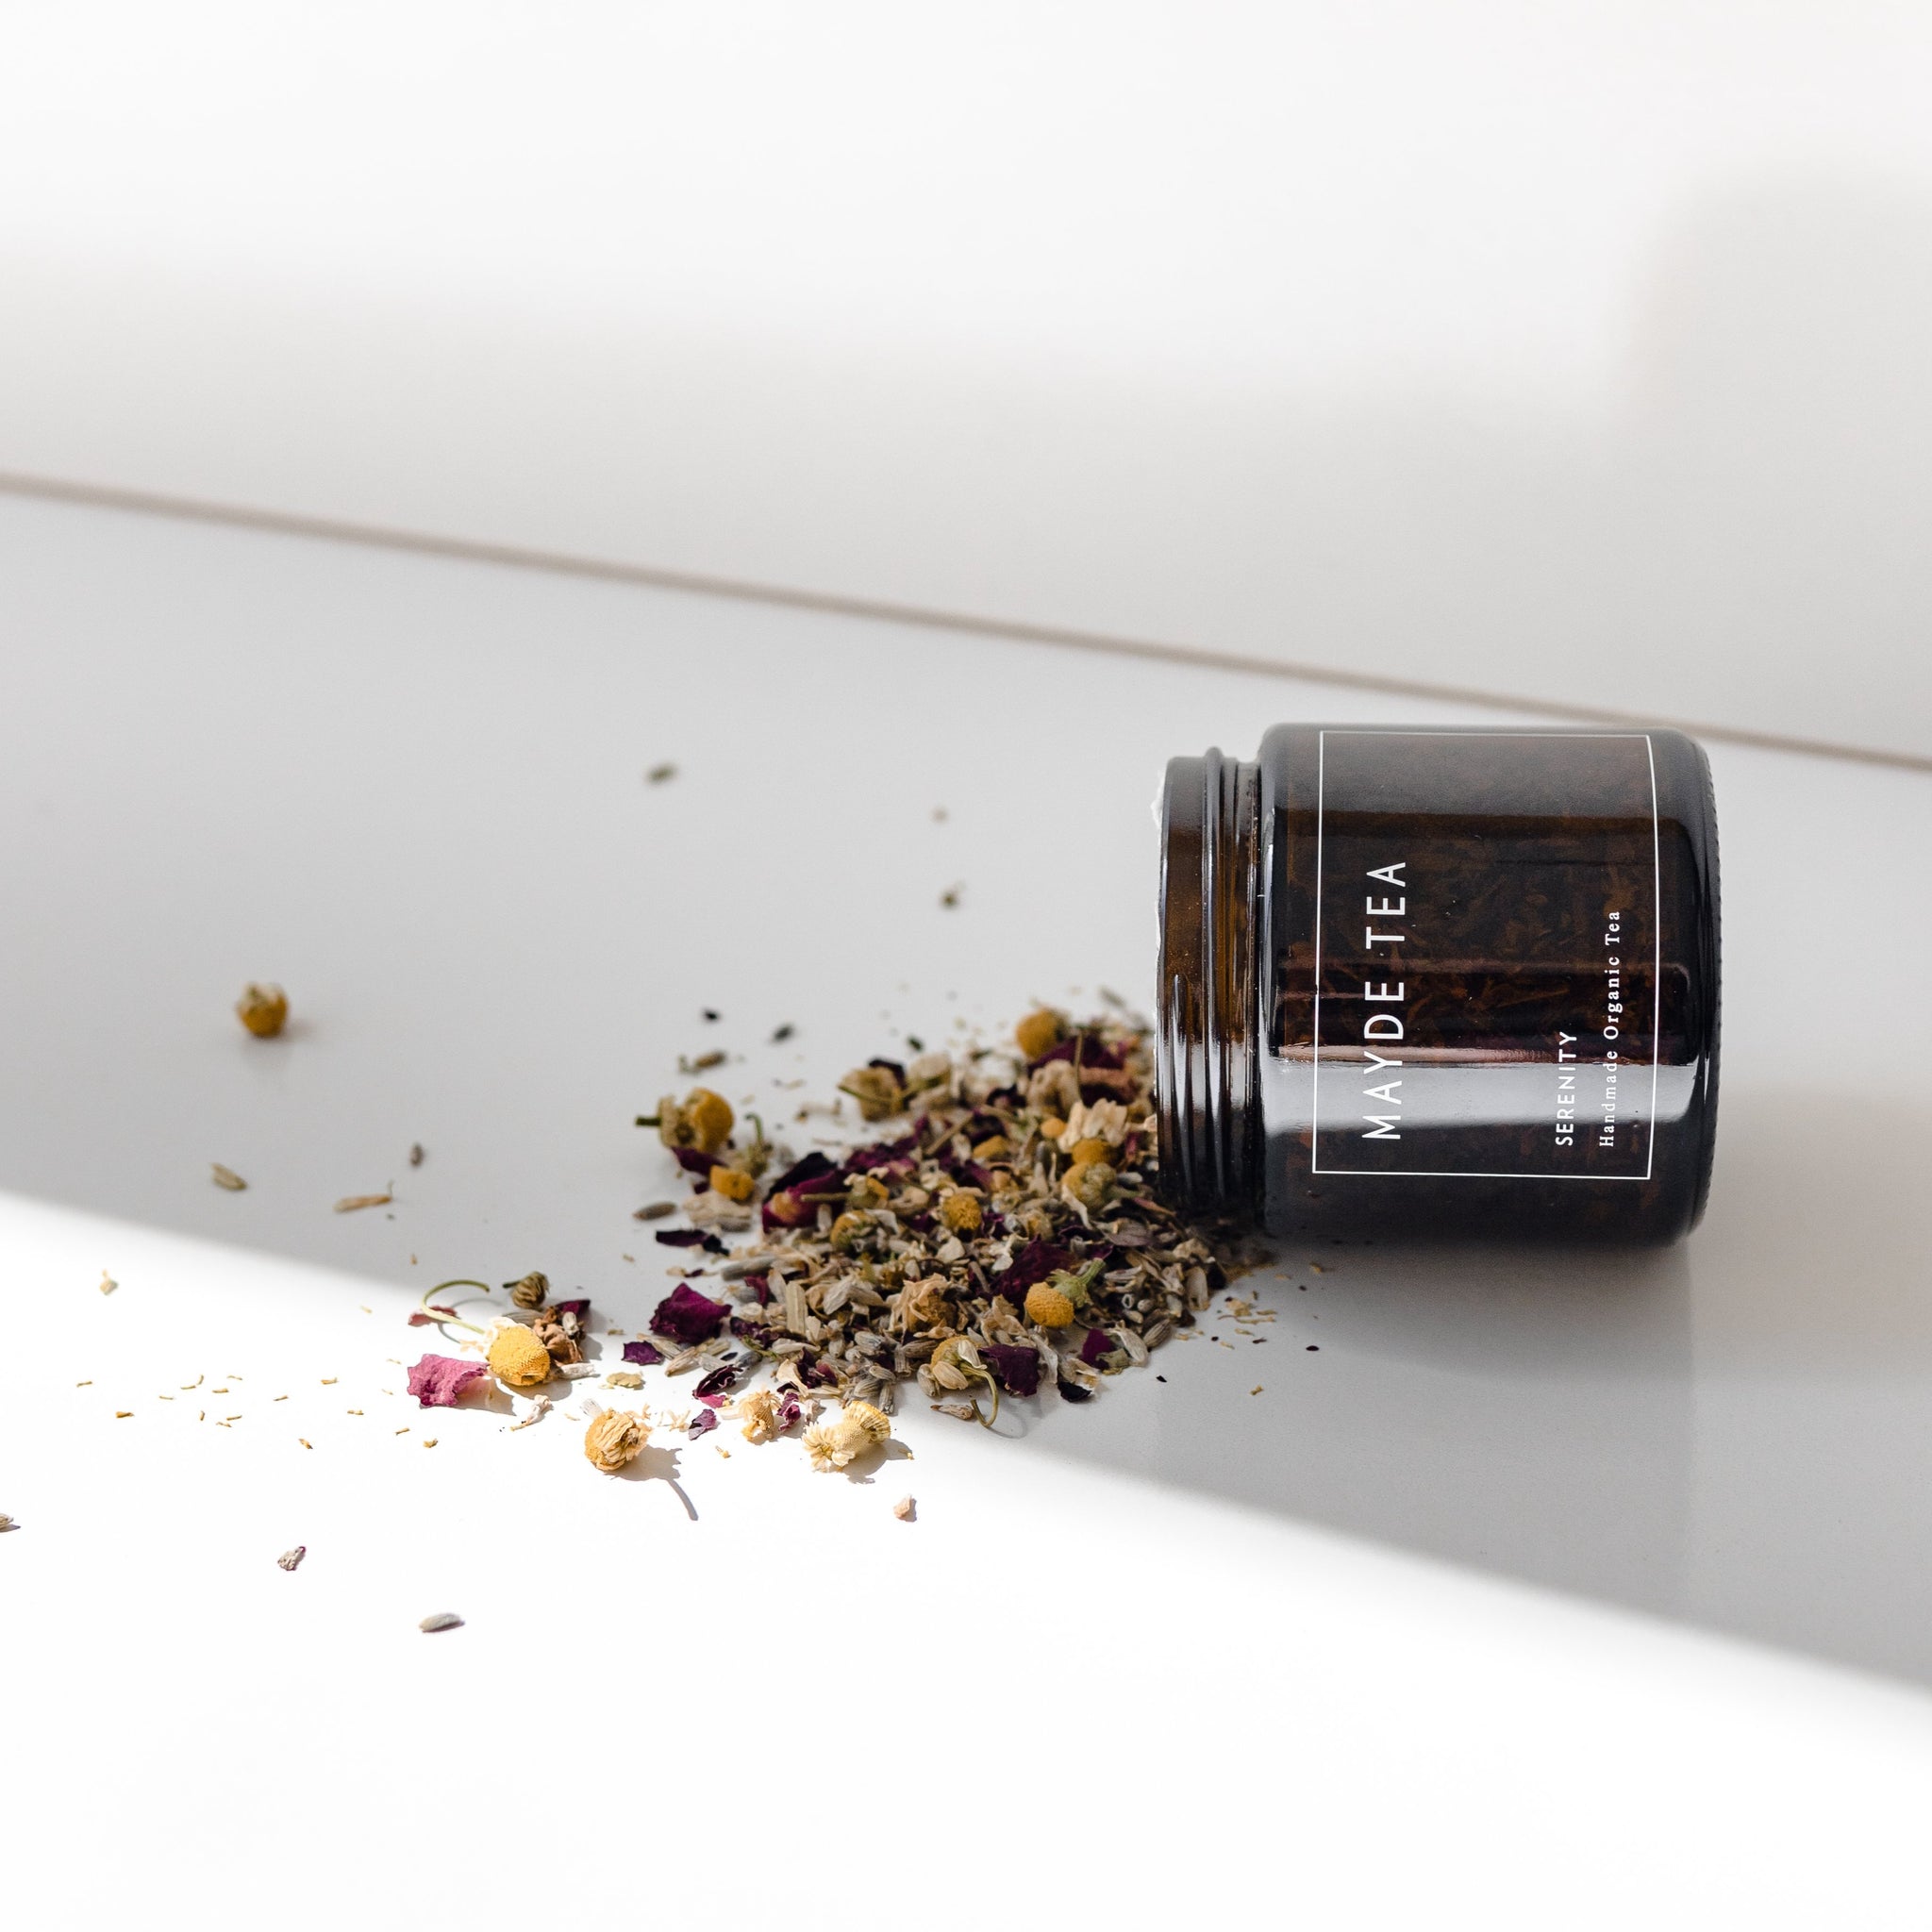  A floral blend of calming herbs, Serenity is both nourishing and warming. Soothing lavender combines with rose, passionflower and chamomile to support the nervous and digestive systems, making this a perfect pre-slumber elixir for a restful night’s sleep.